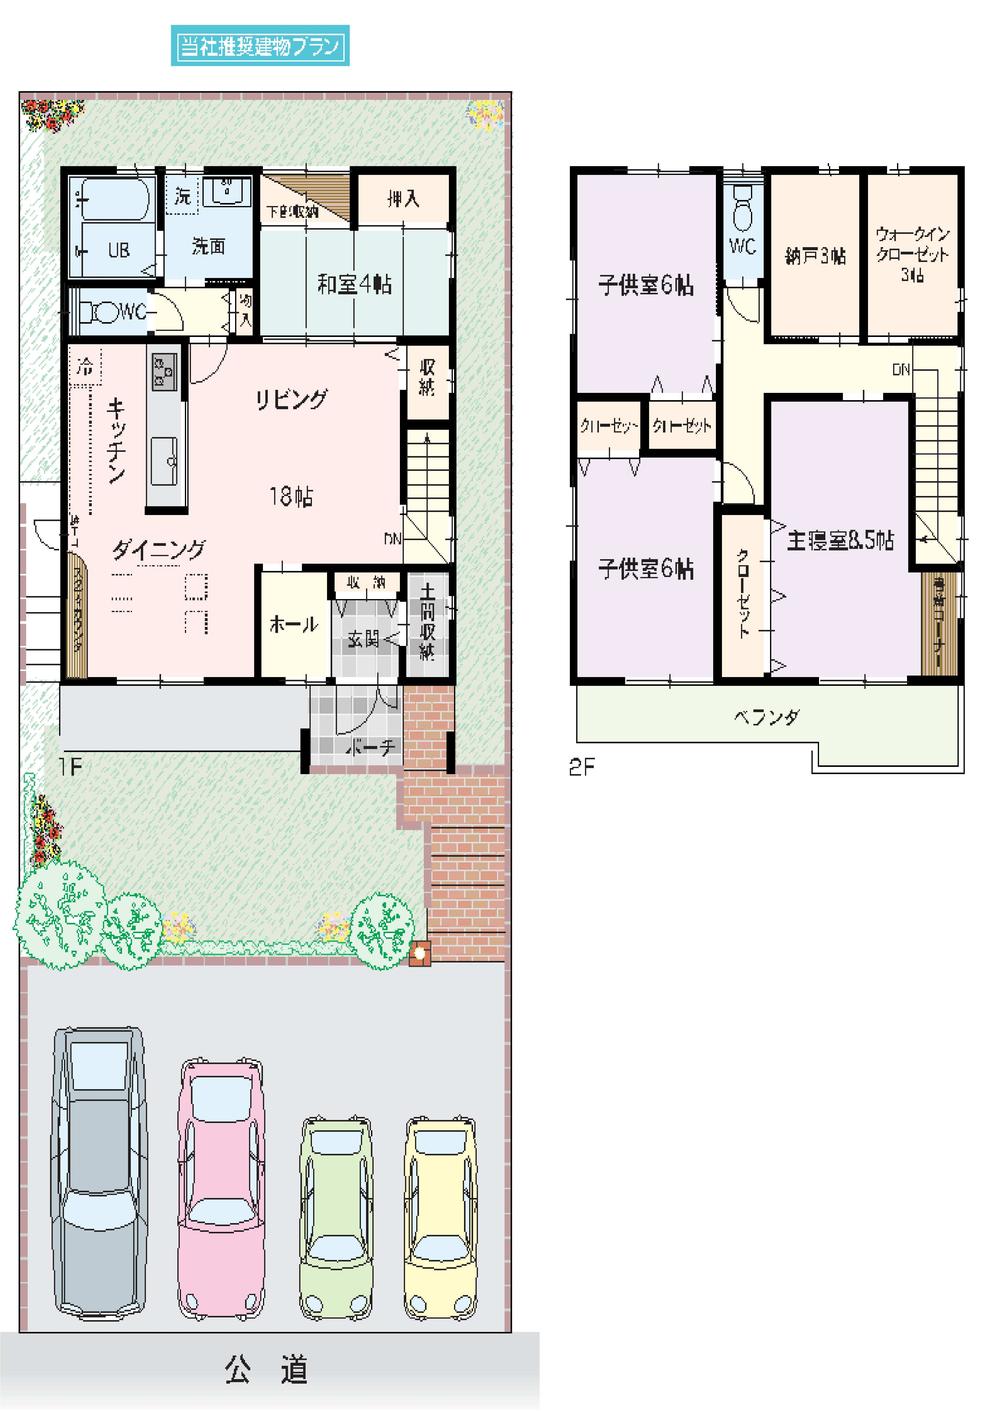 Compartment view + building plan example. Building plan example (south) 4LDK, Land price 12.4 million yen, Land area 186 sq m , Building price 23 million yen, Building area 120.9 sq m